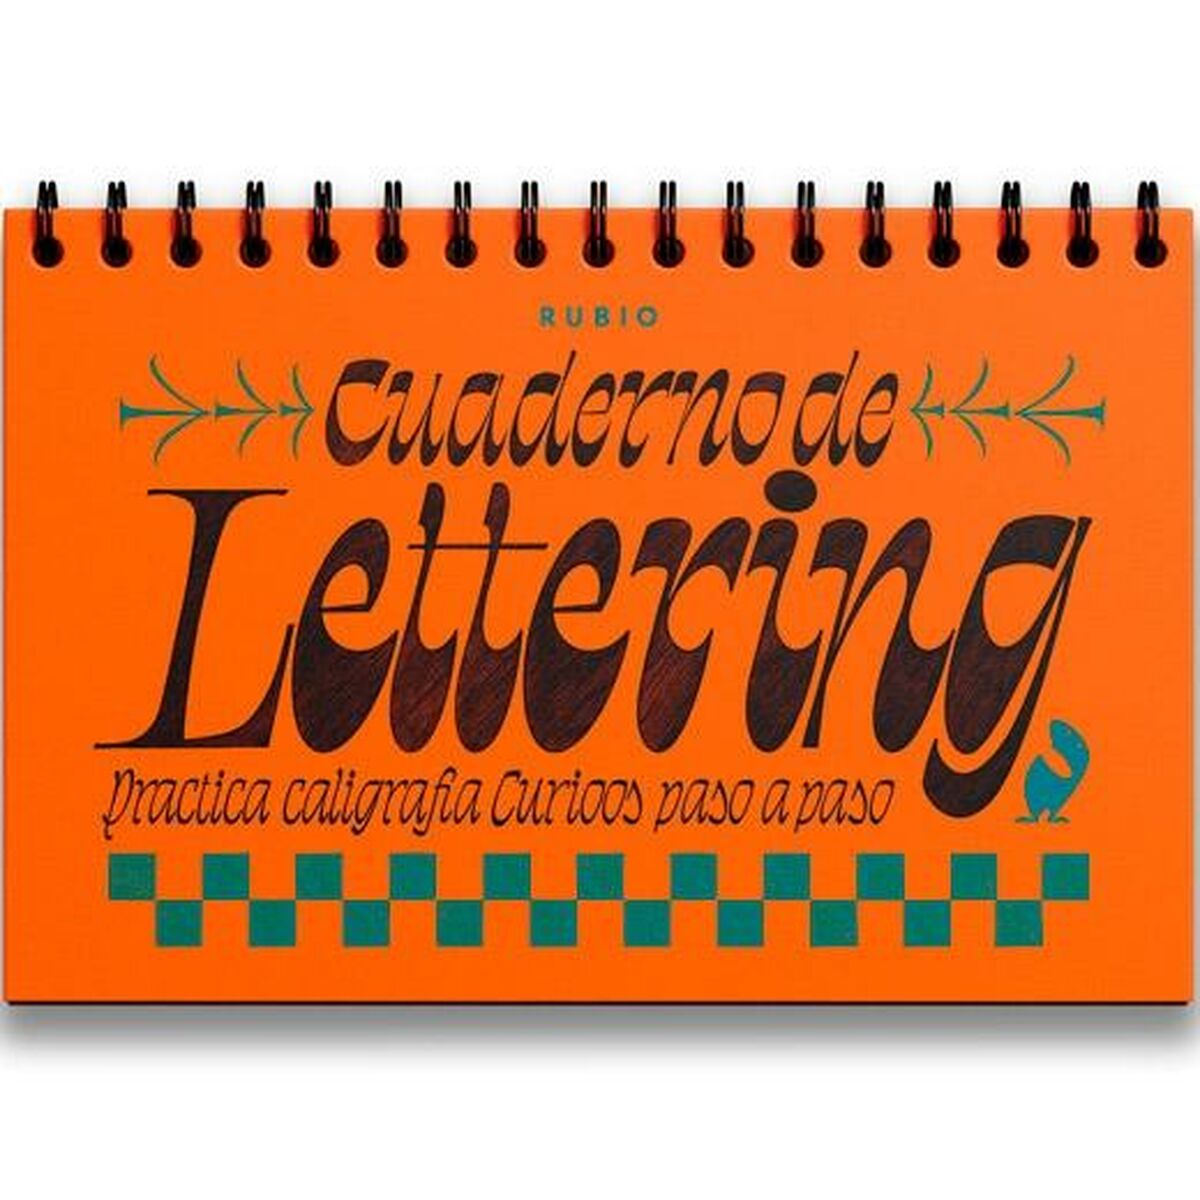 Writing and calligraphy notebook Rubio Lettering Curioos 30,4 x 20,4 cm 212 Blad